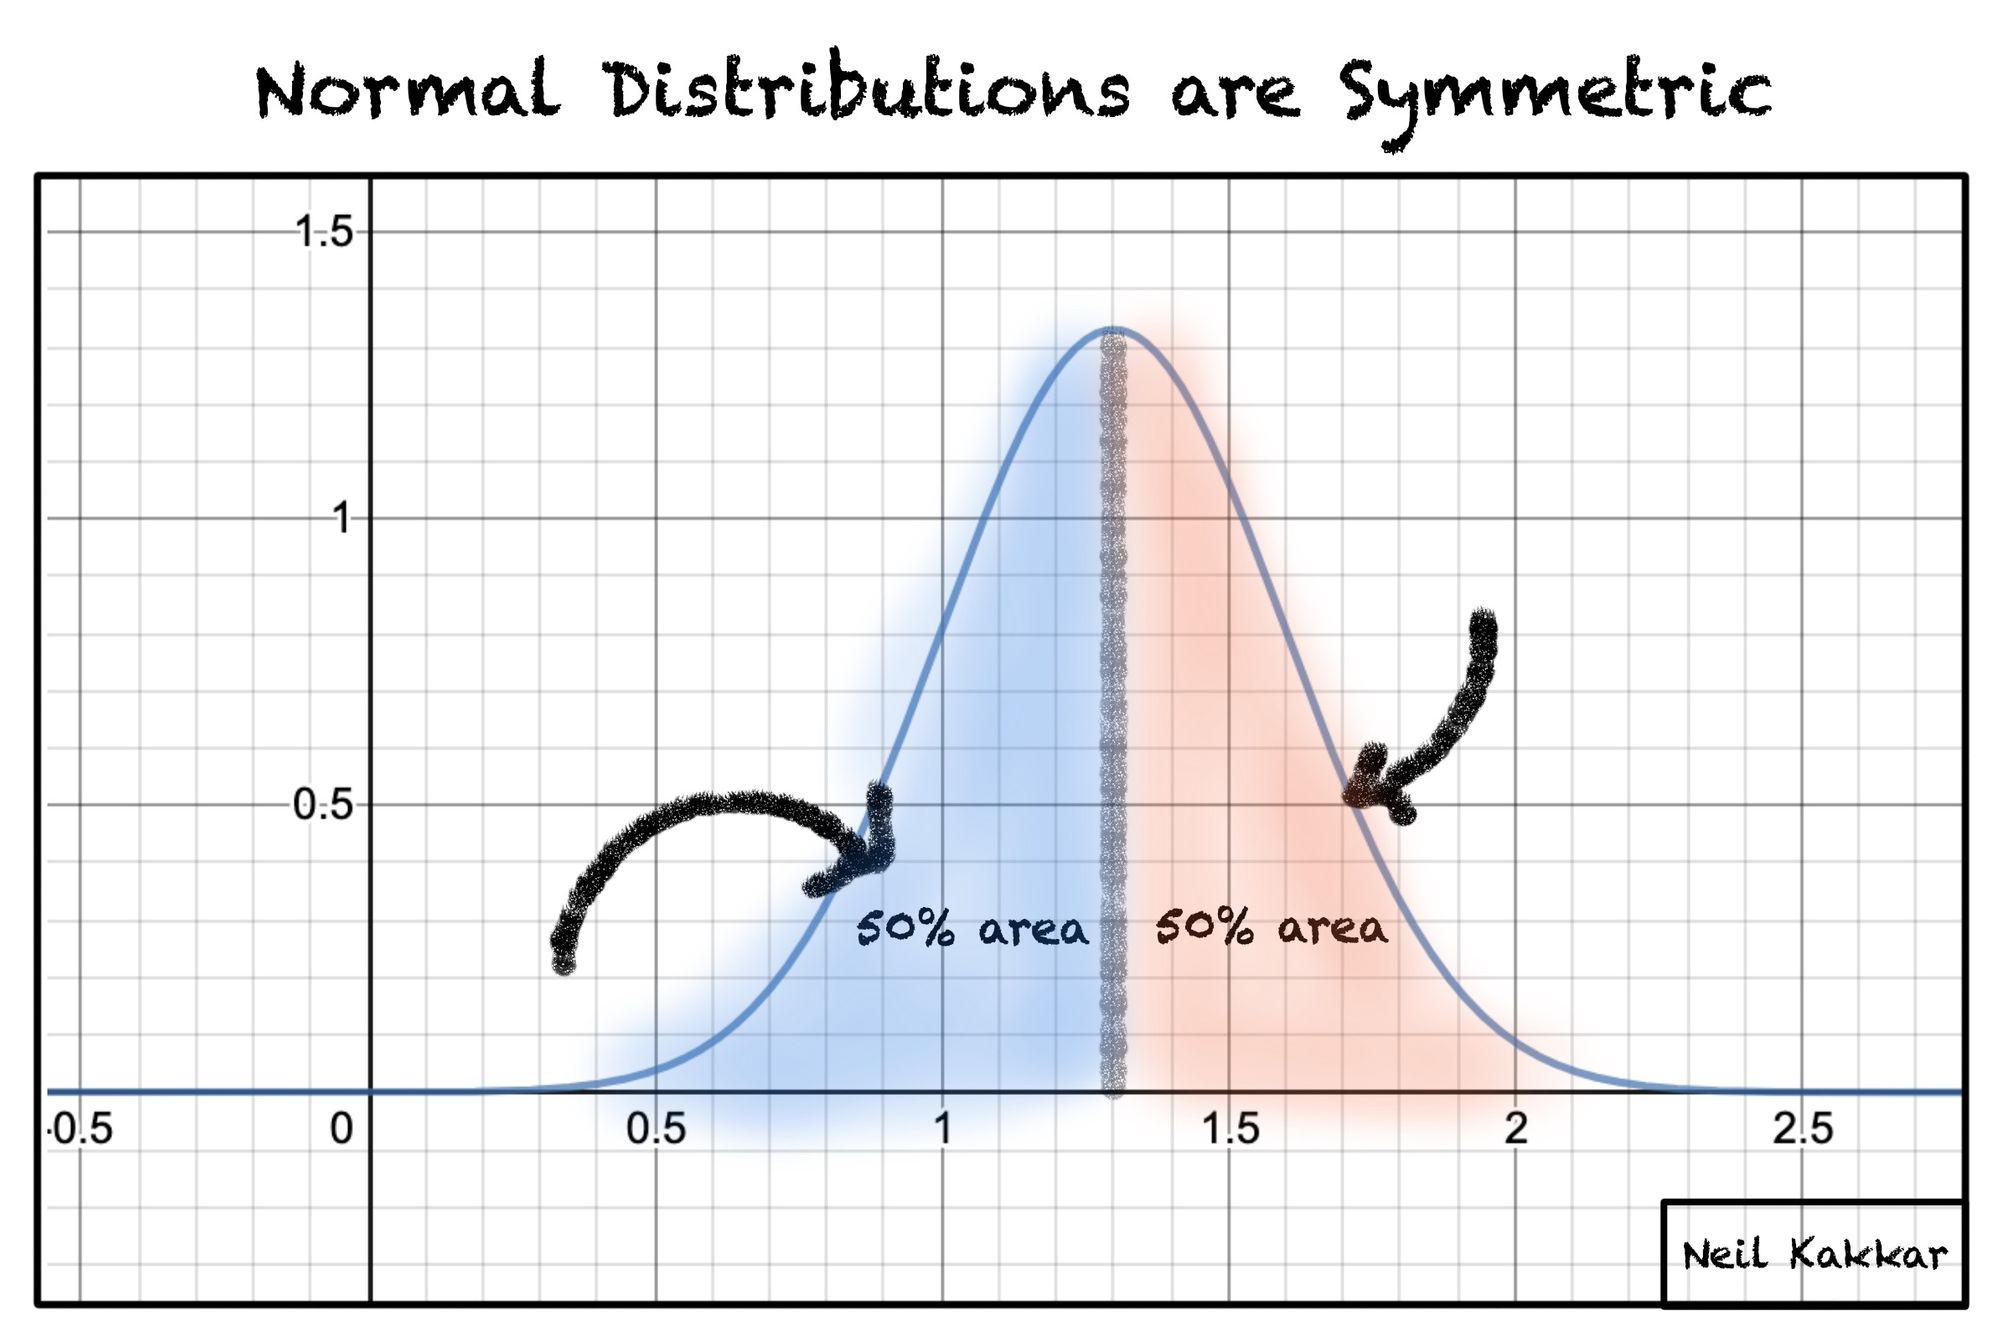 Normal distribution bell-shaped curve with standard deviations (From